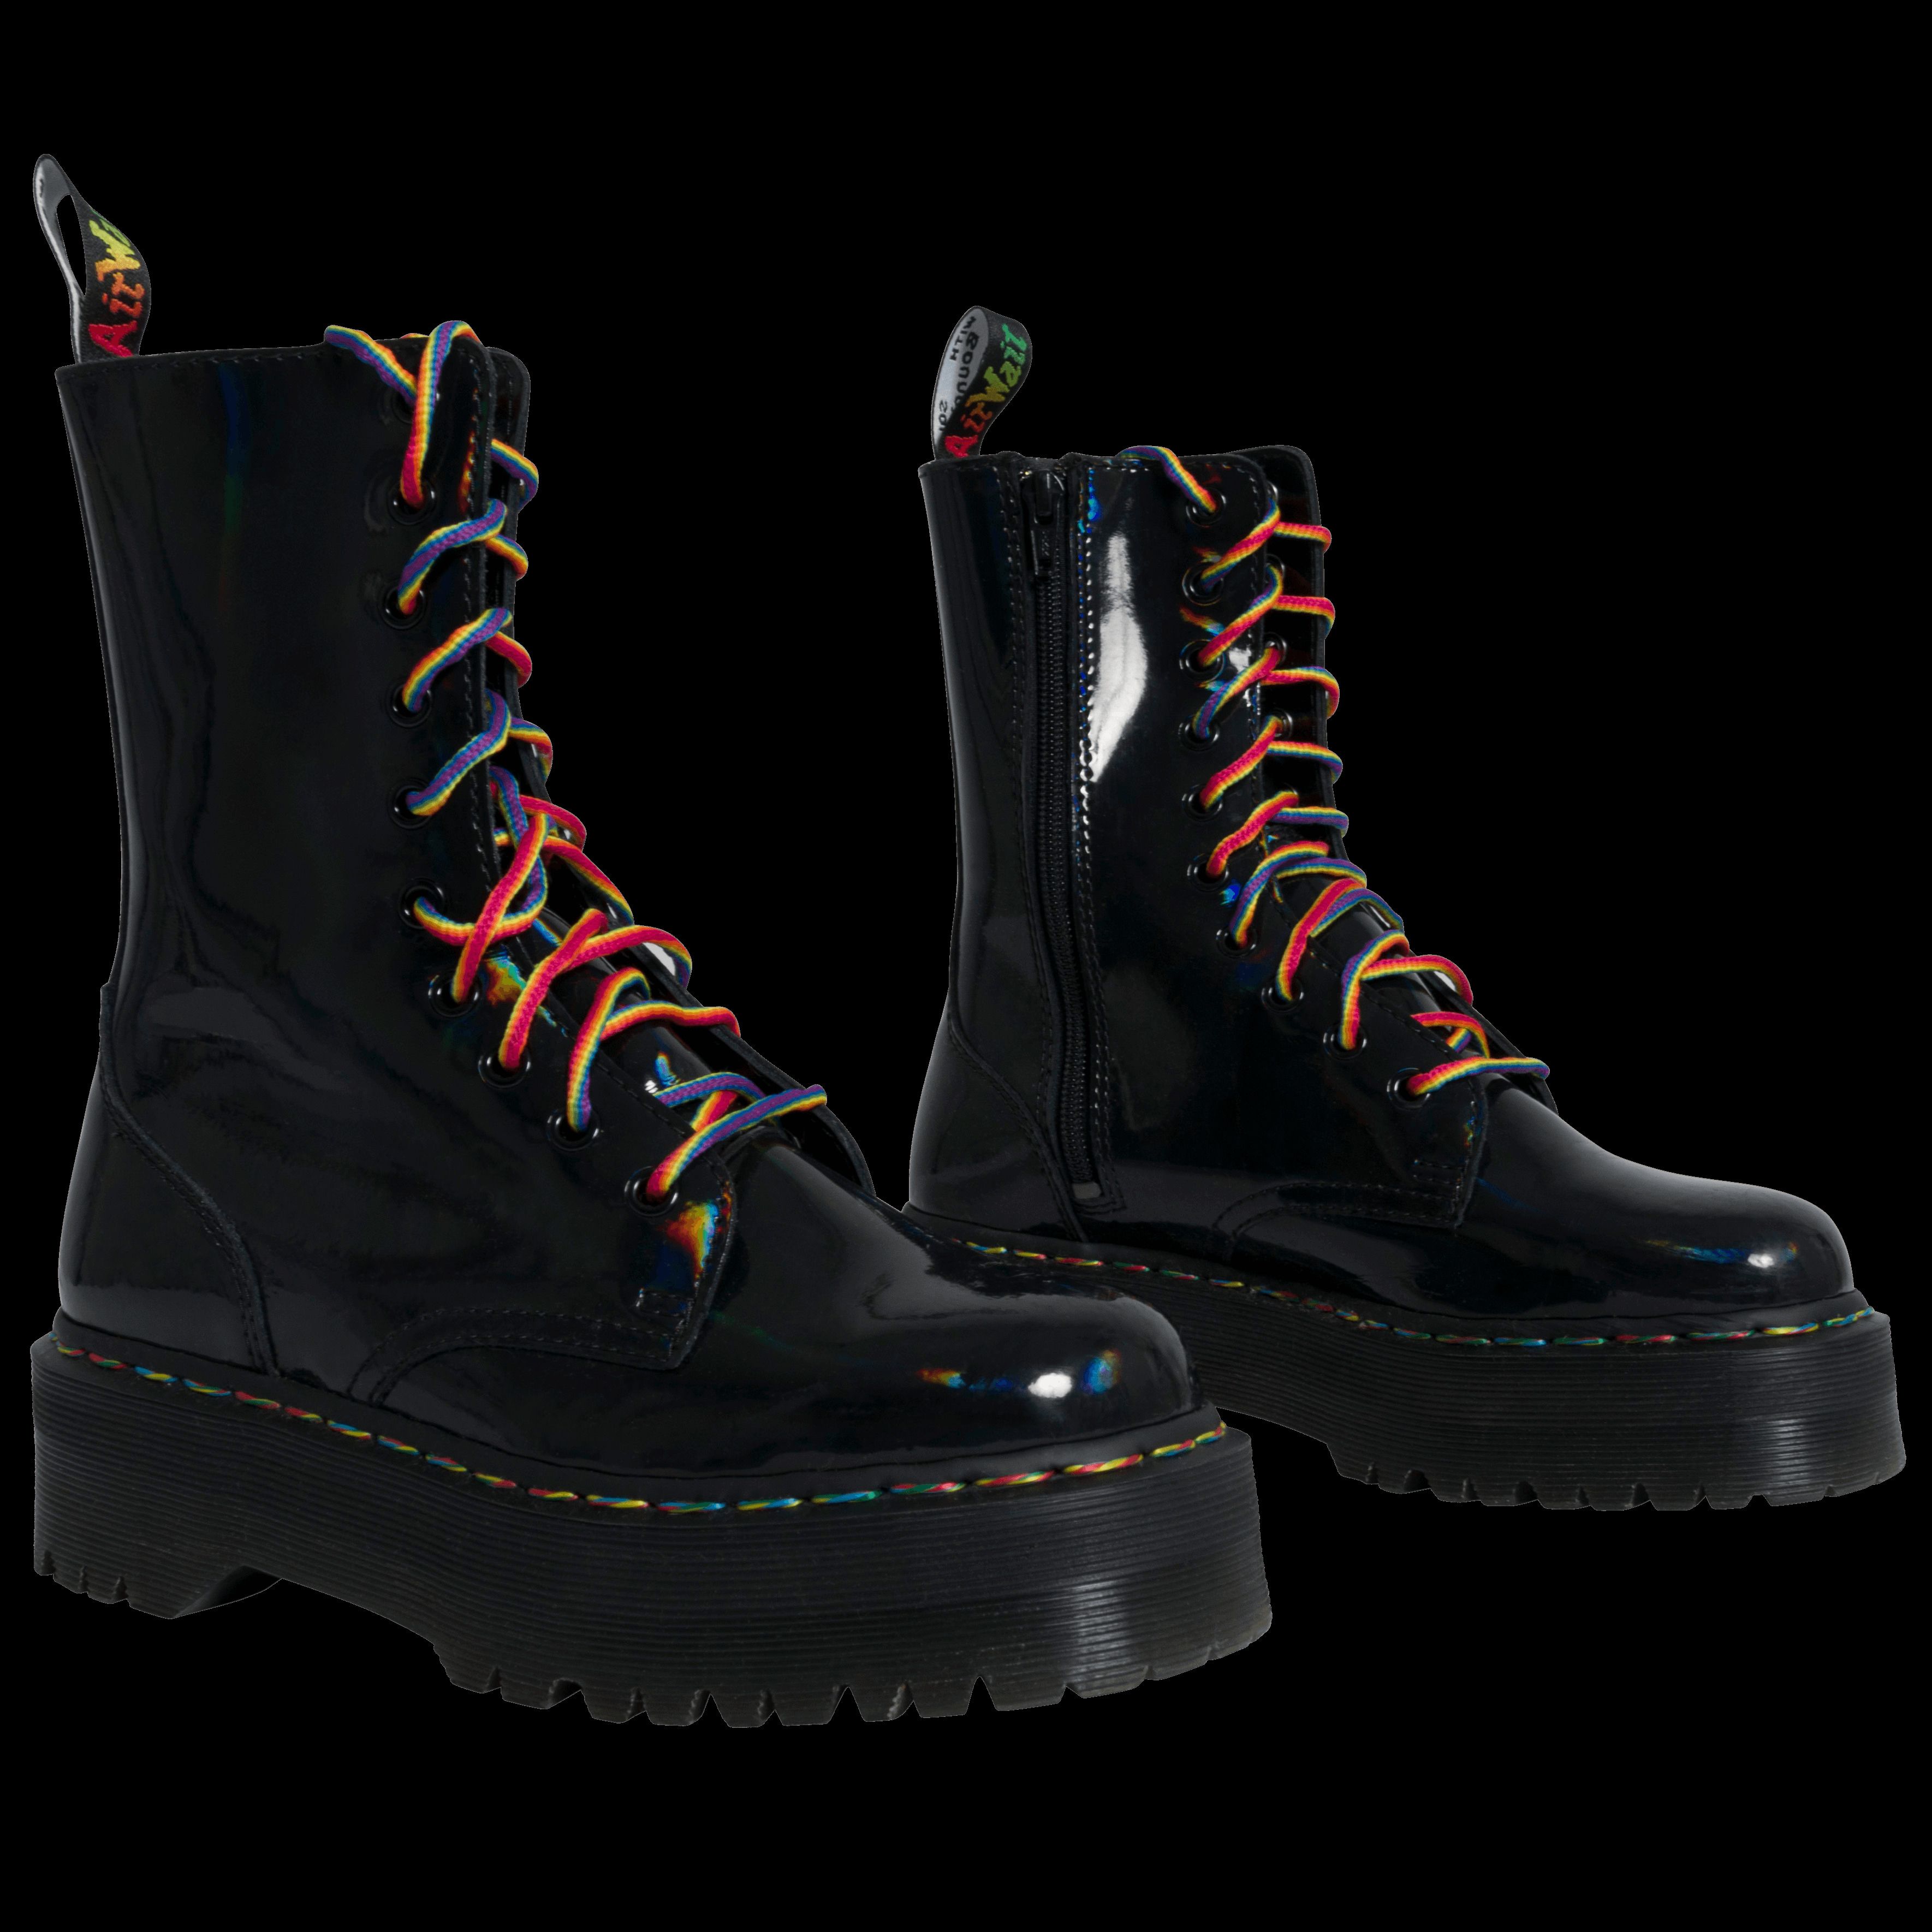 Dr. Martens Jadon Hi Boots in Rainbow by Georgie Flores | Basic.Space